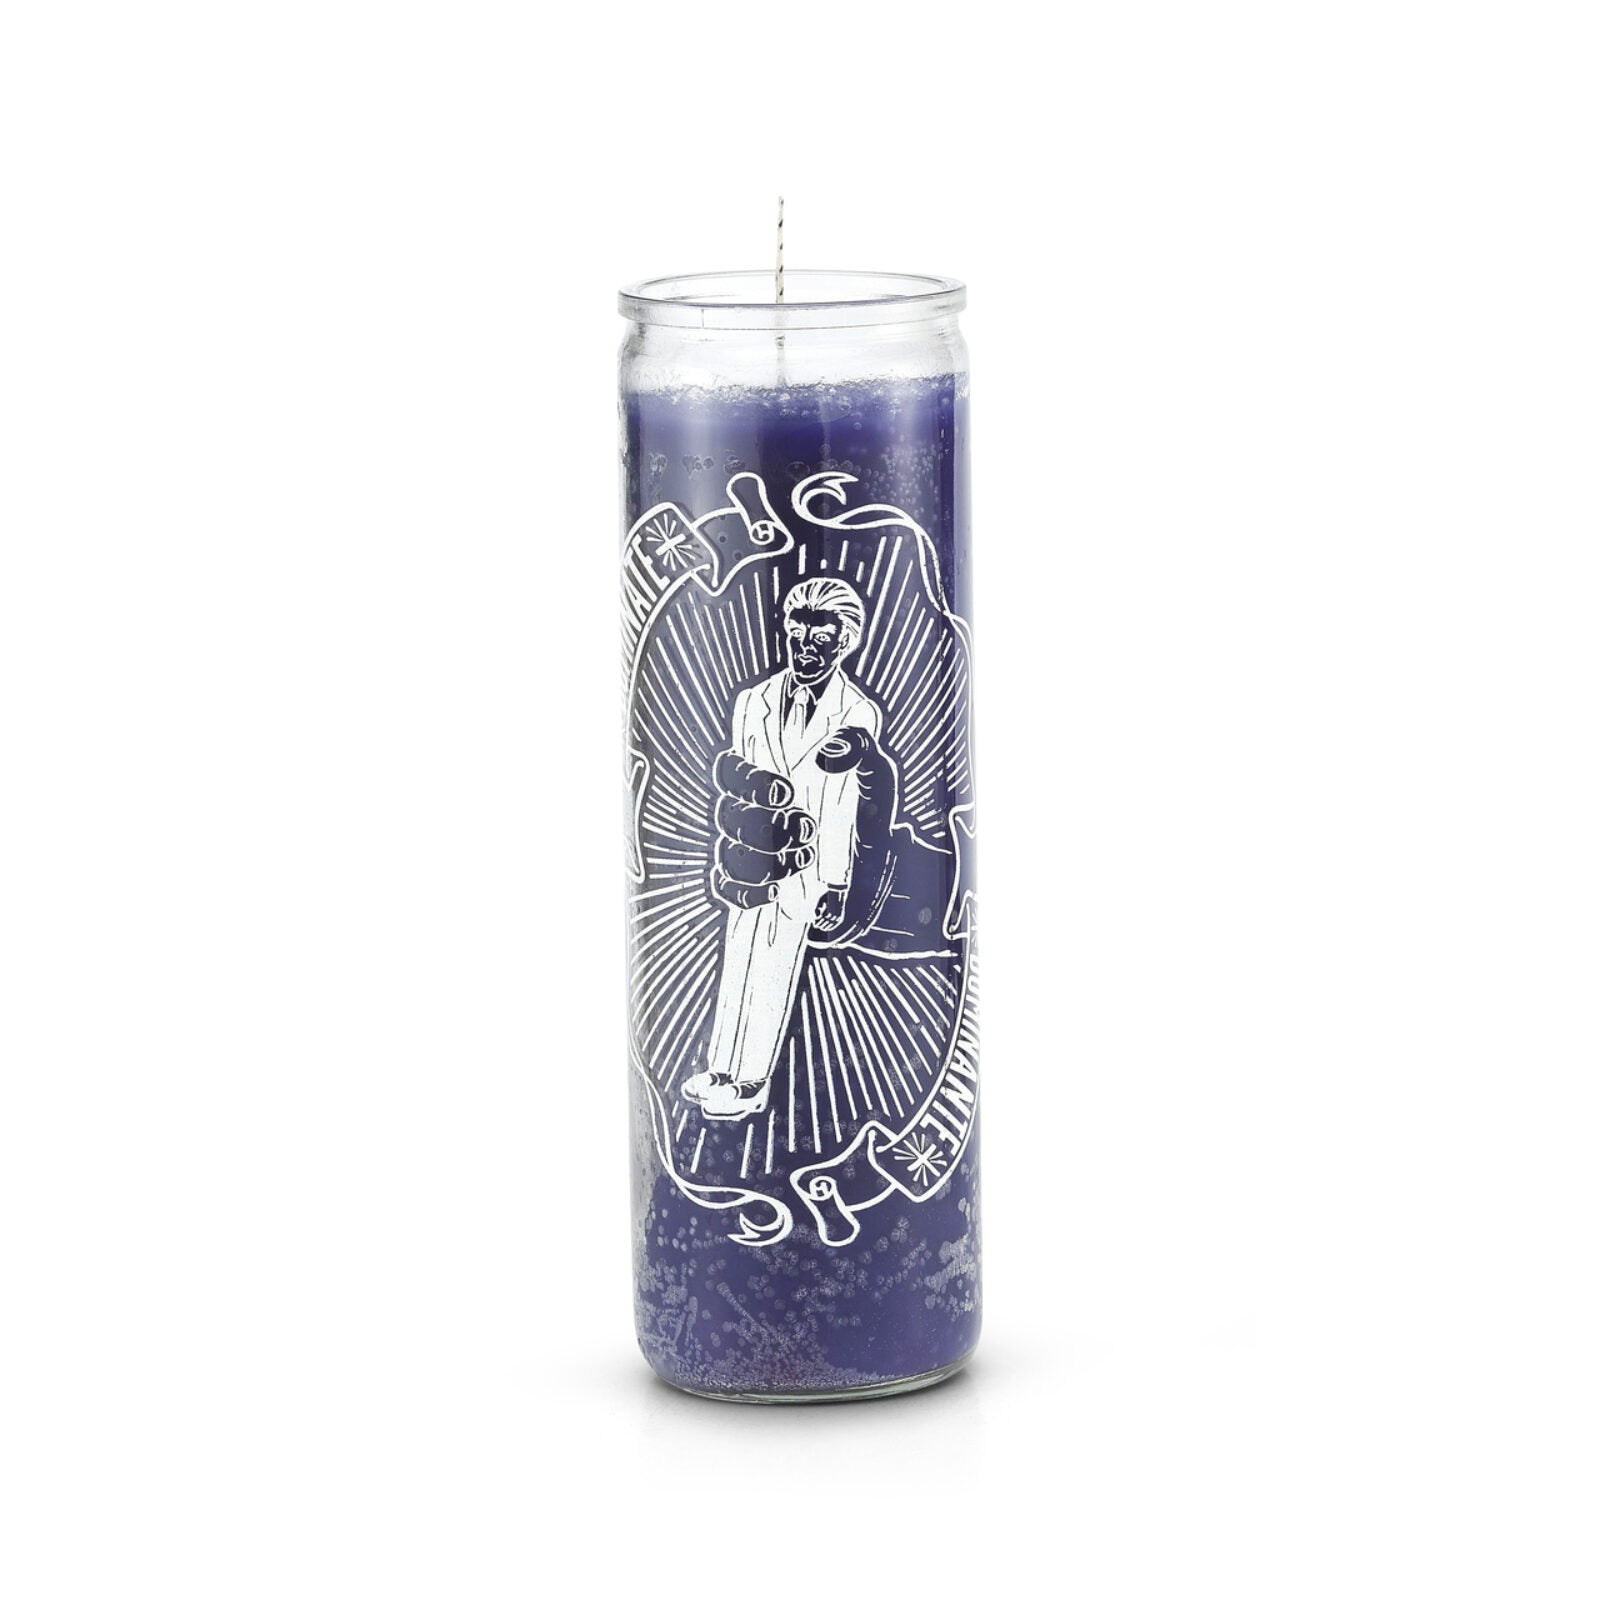 Domination 7 Day 1 Color Prayer Candle Check My Vibes